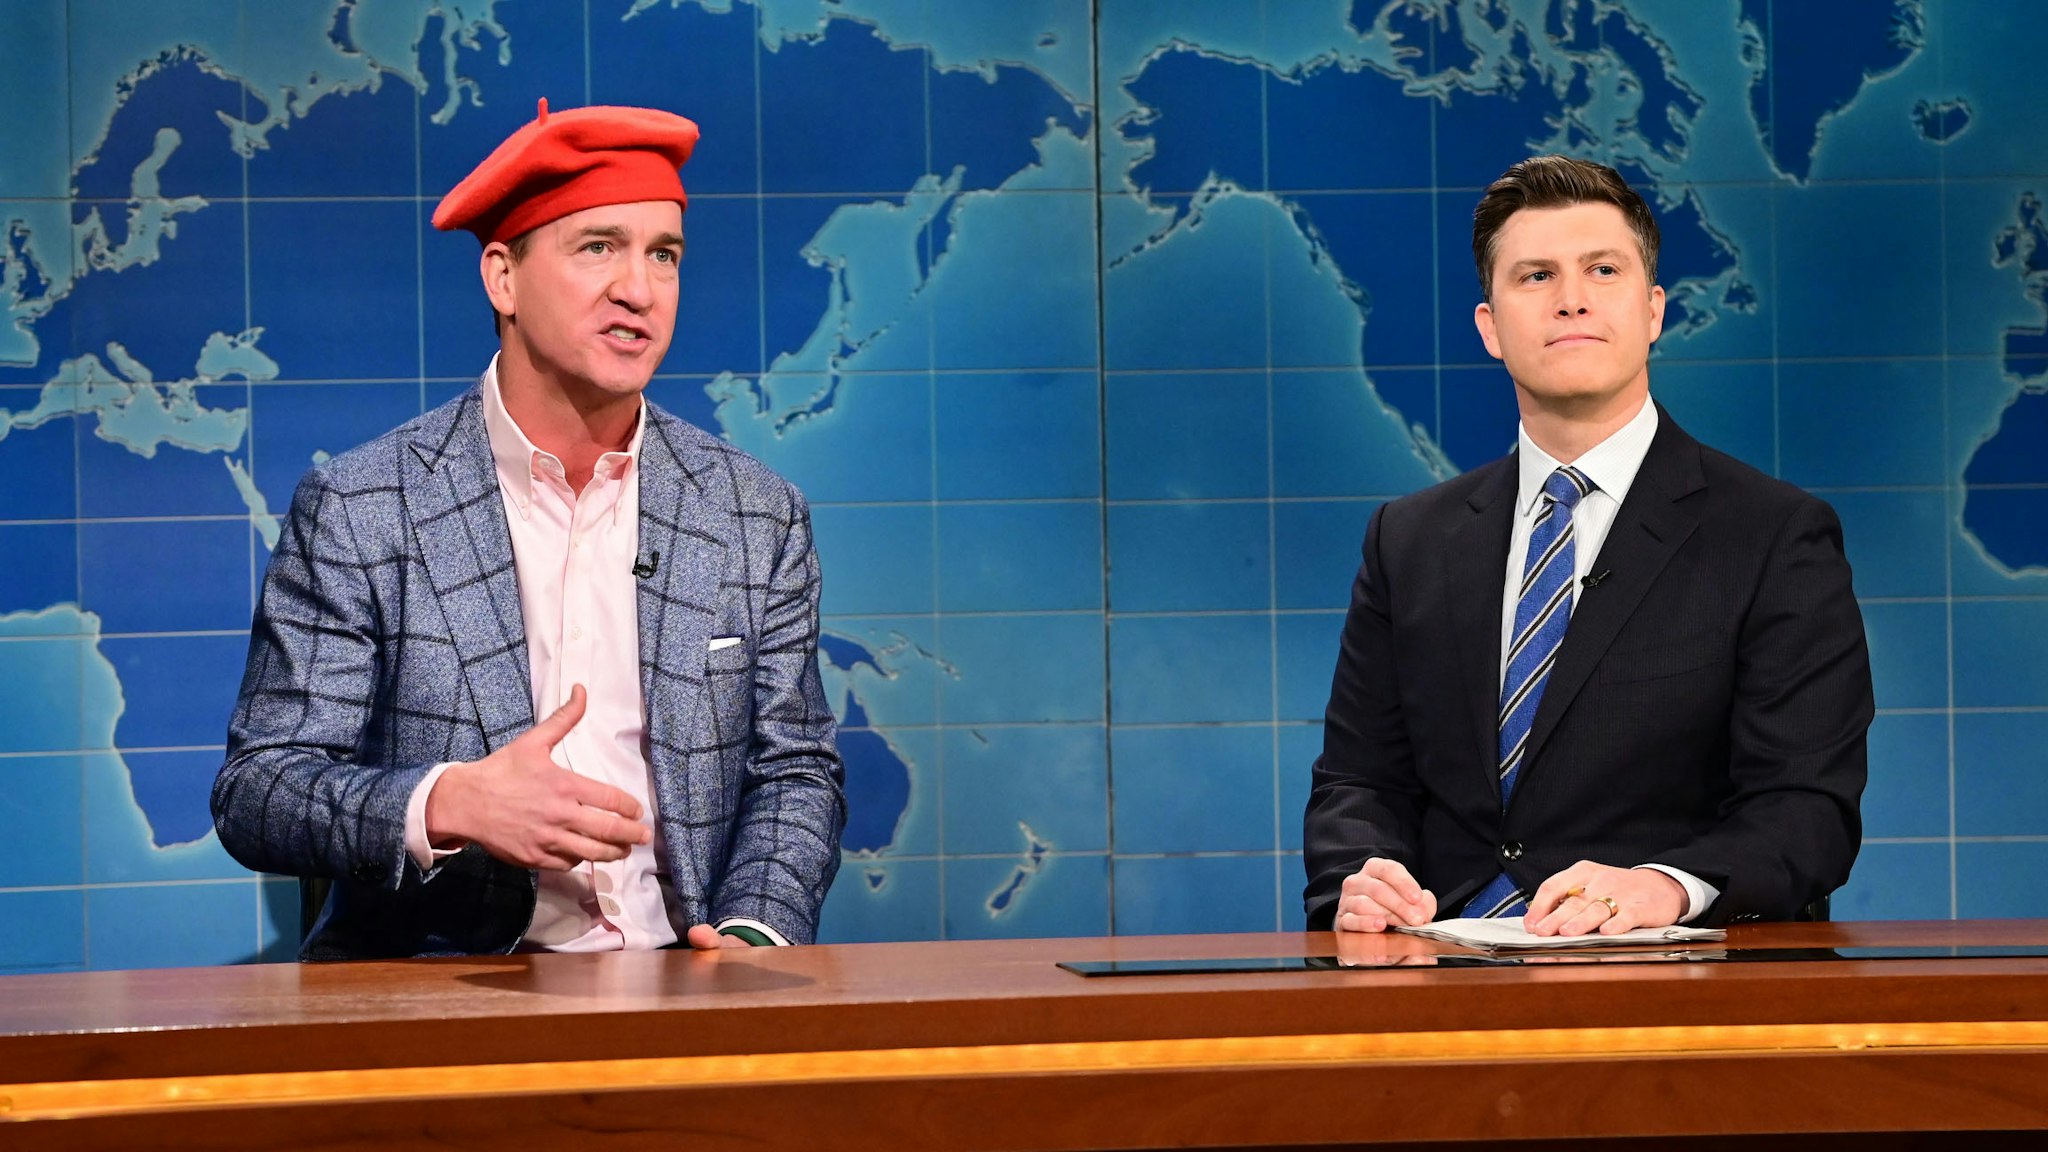 SATURDAY NIGHT LIVE -- Willem Dafoe, Katy Perry Episode 1817 -- Pictured: (l-r) Peyton Manning and anchor Colin Jost during Weekend Update on Saturday, January 29, 2022